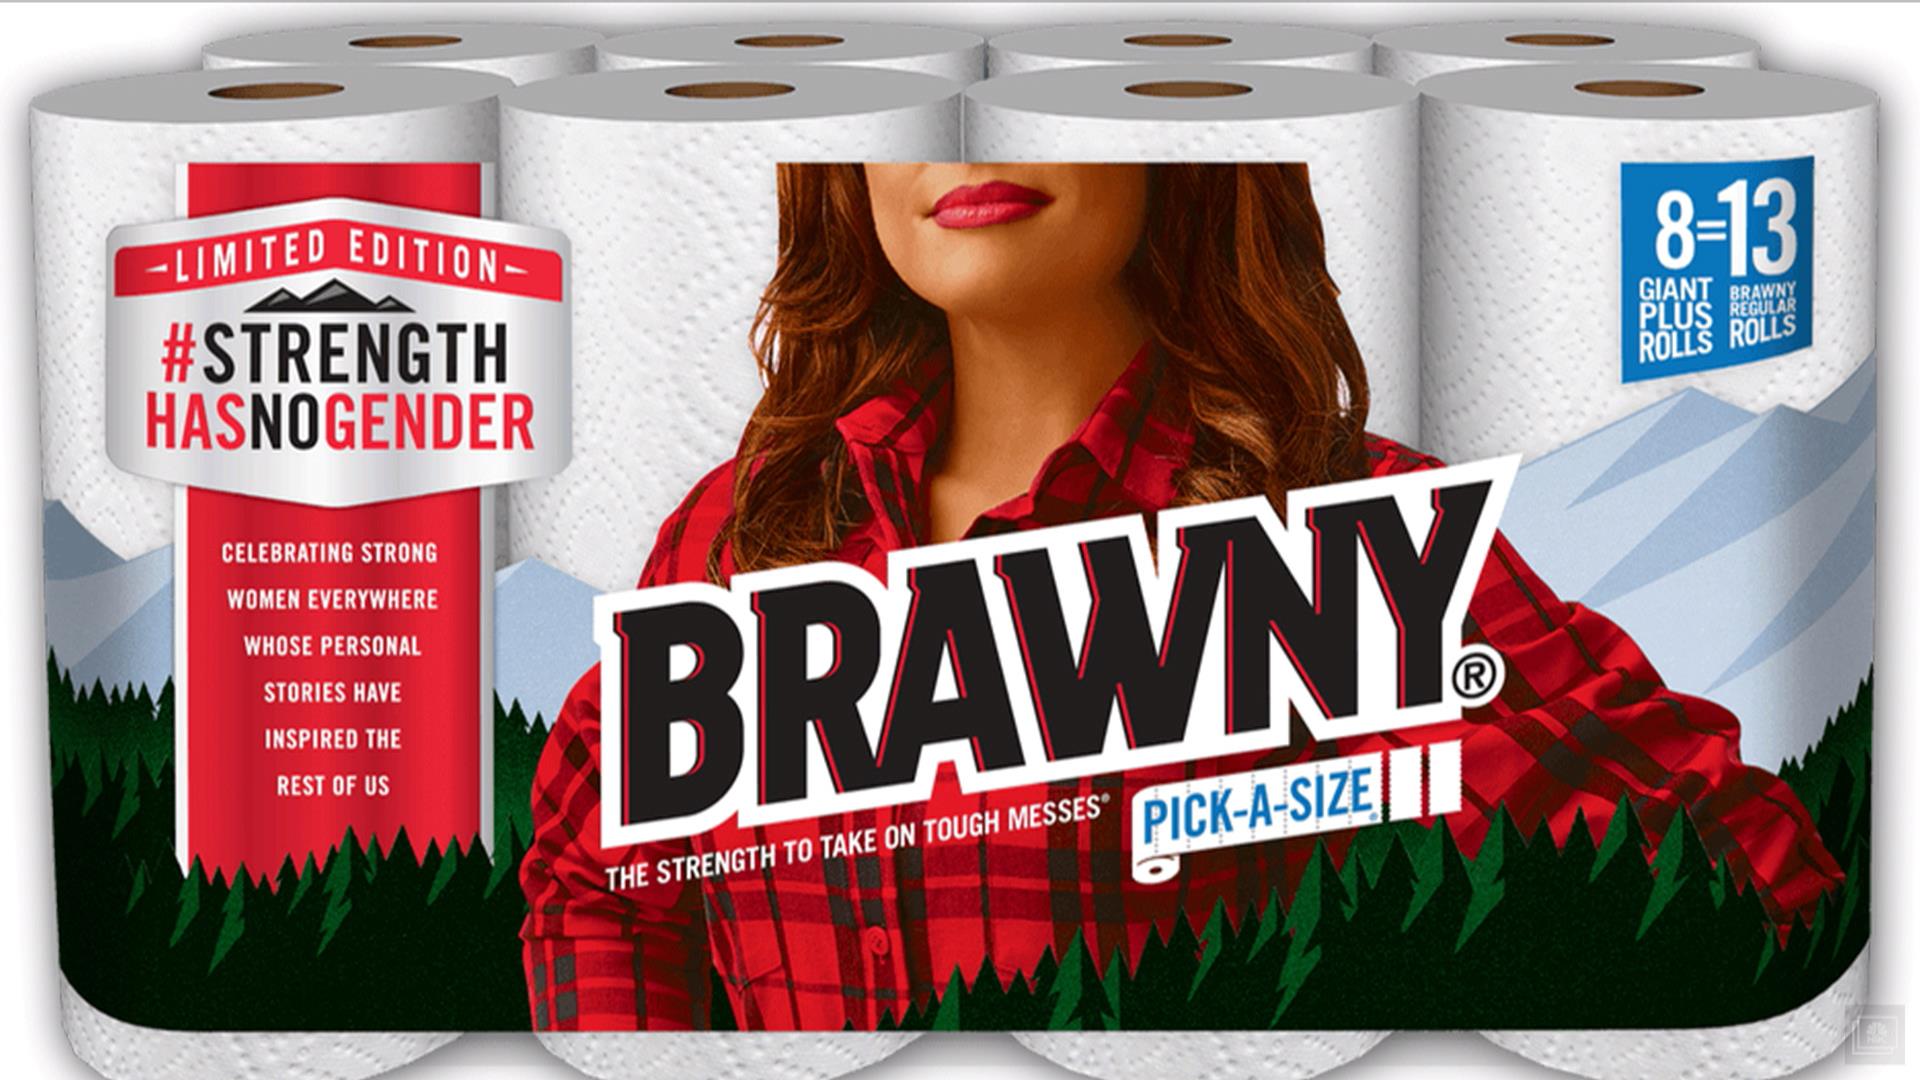 Brawny puts a woman on its paper towel packaging for the first time